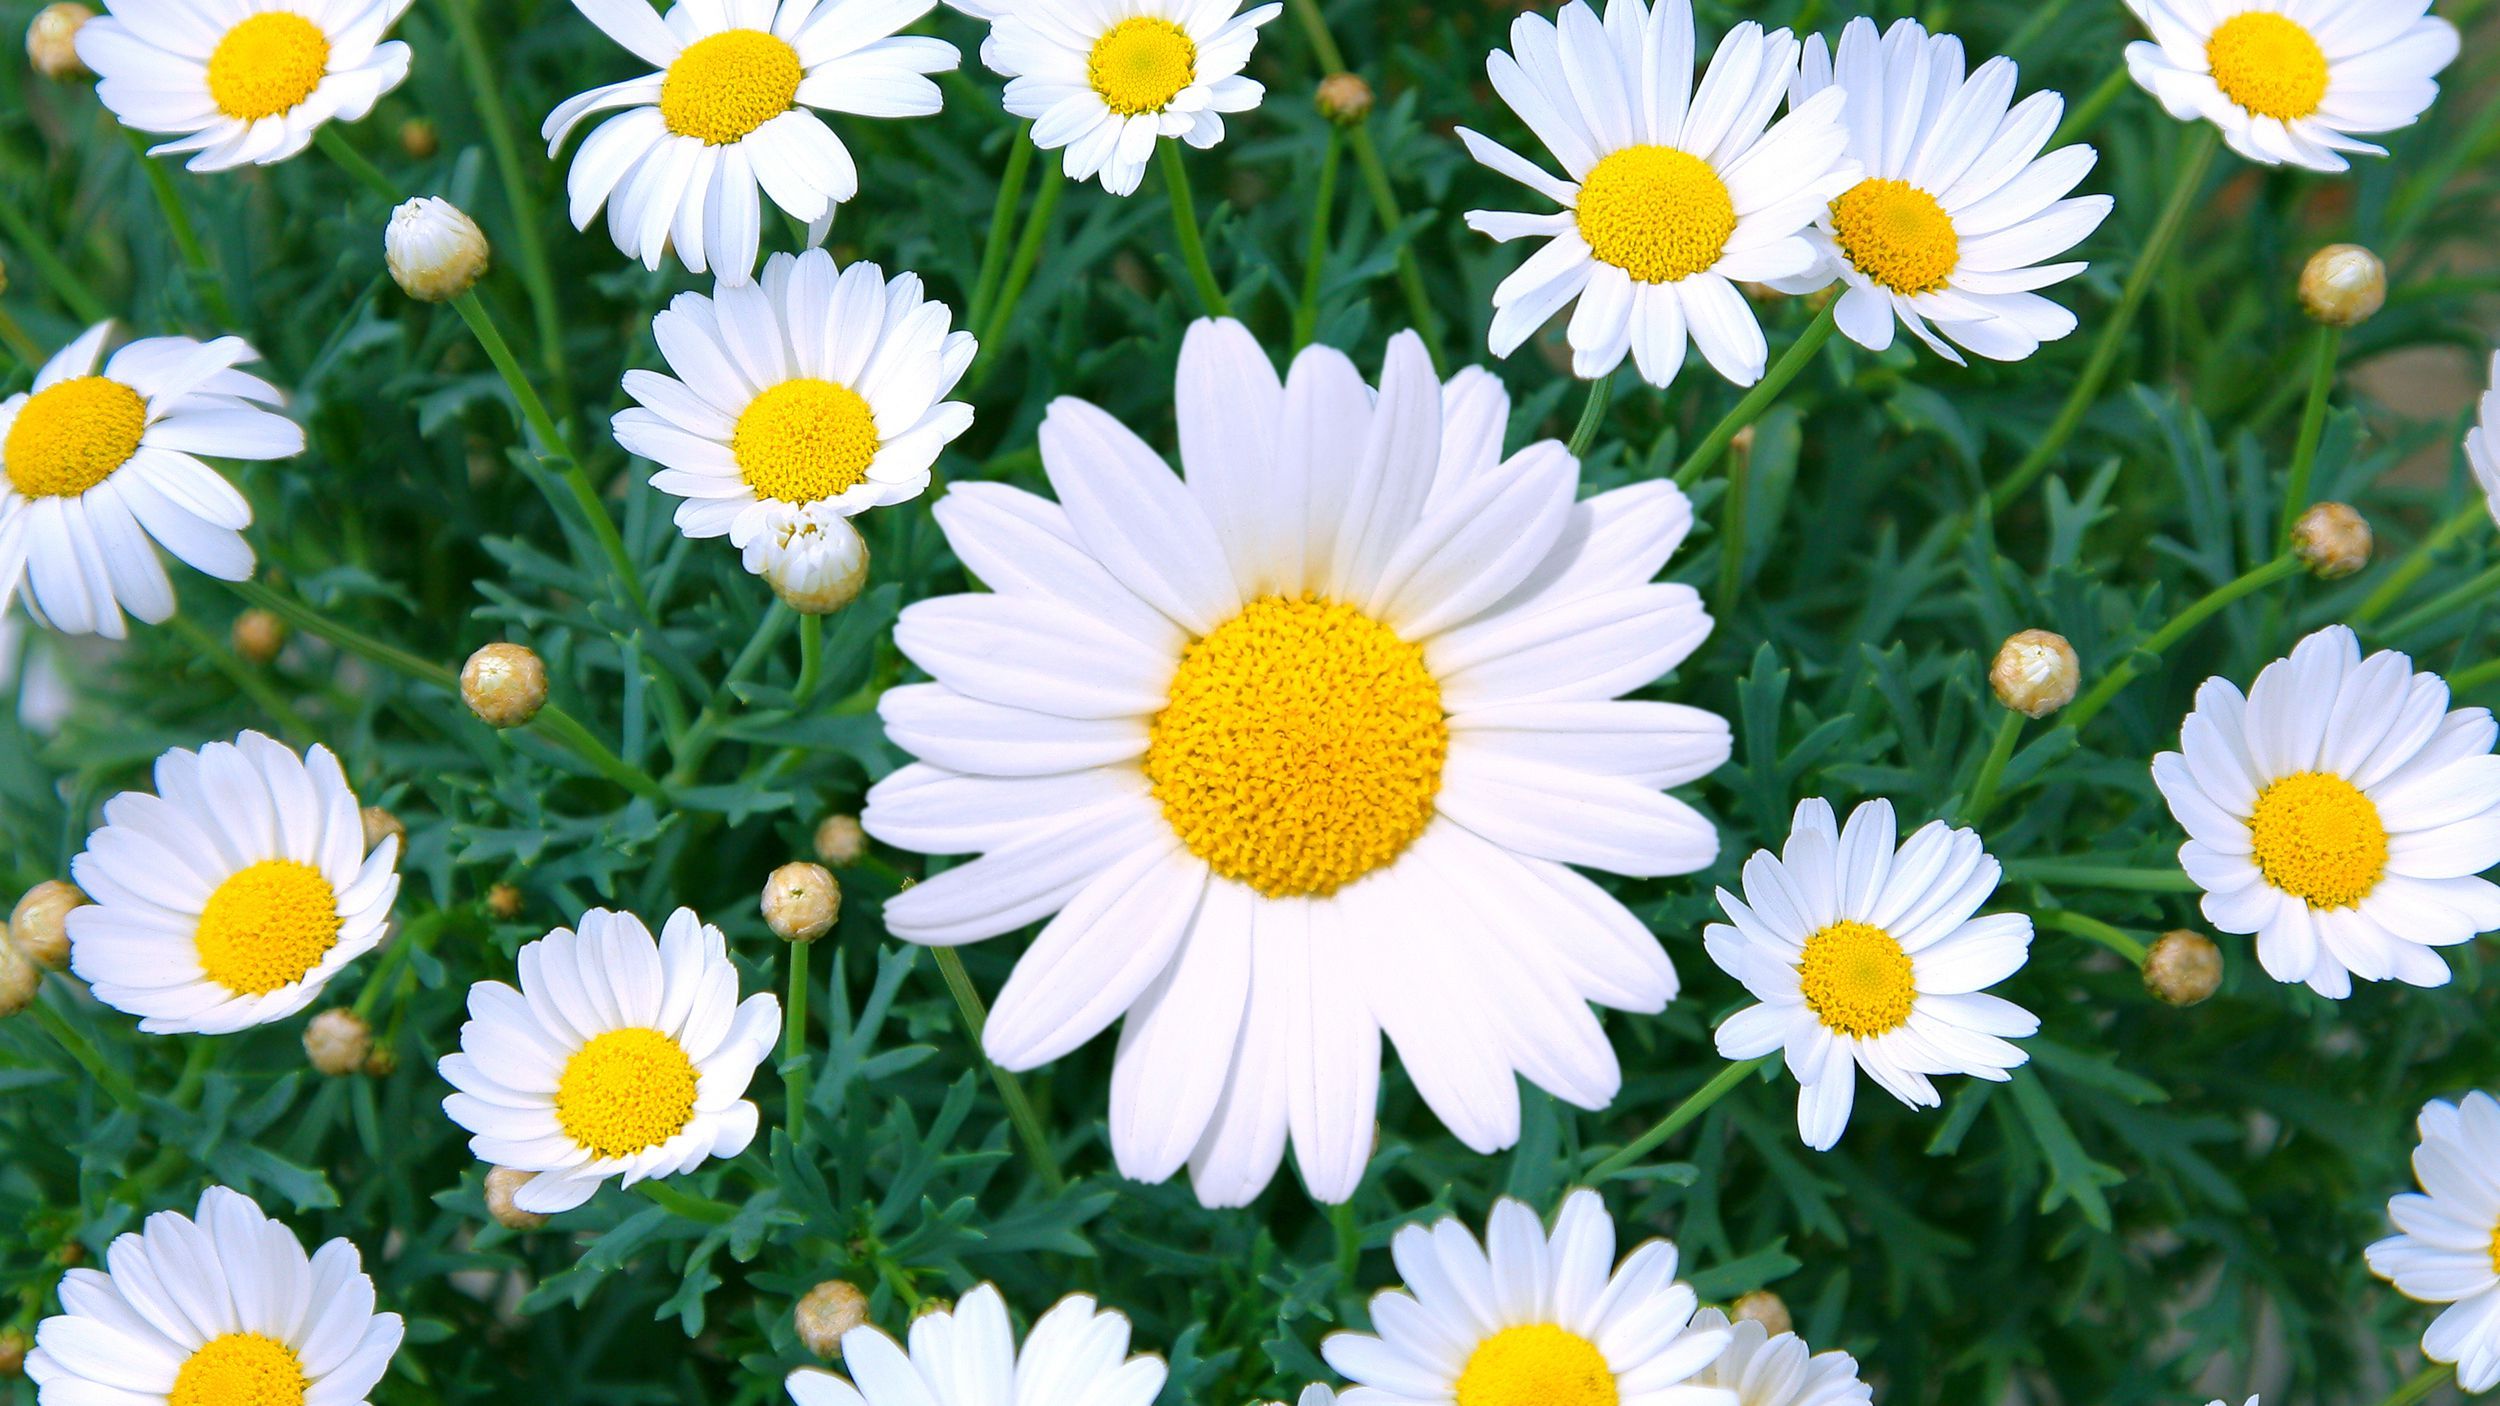 Image of Daisies plant